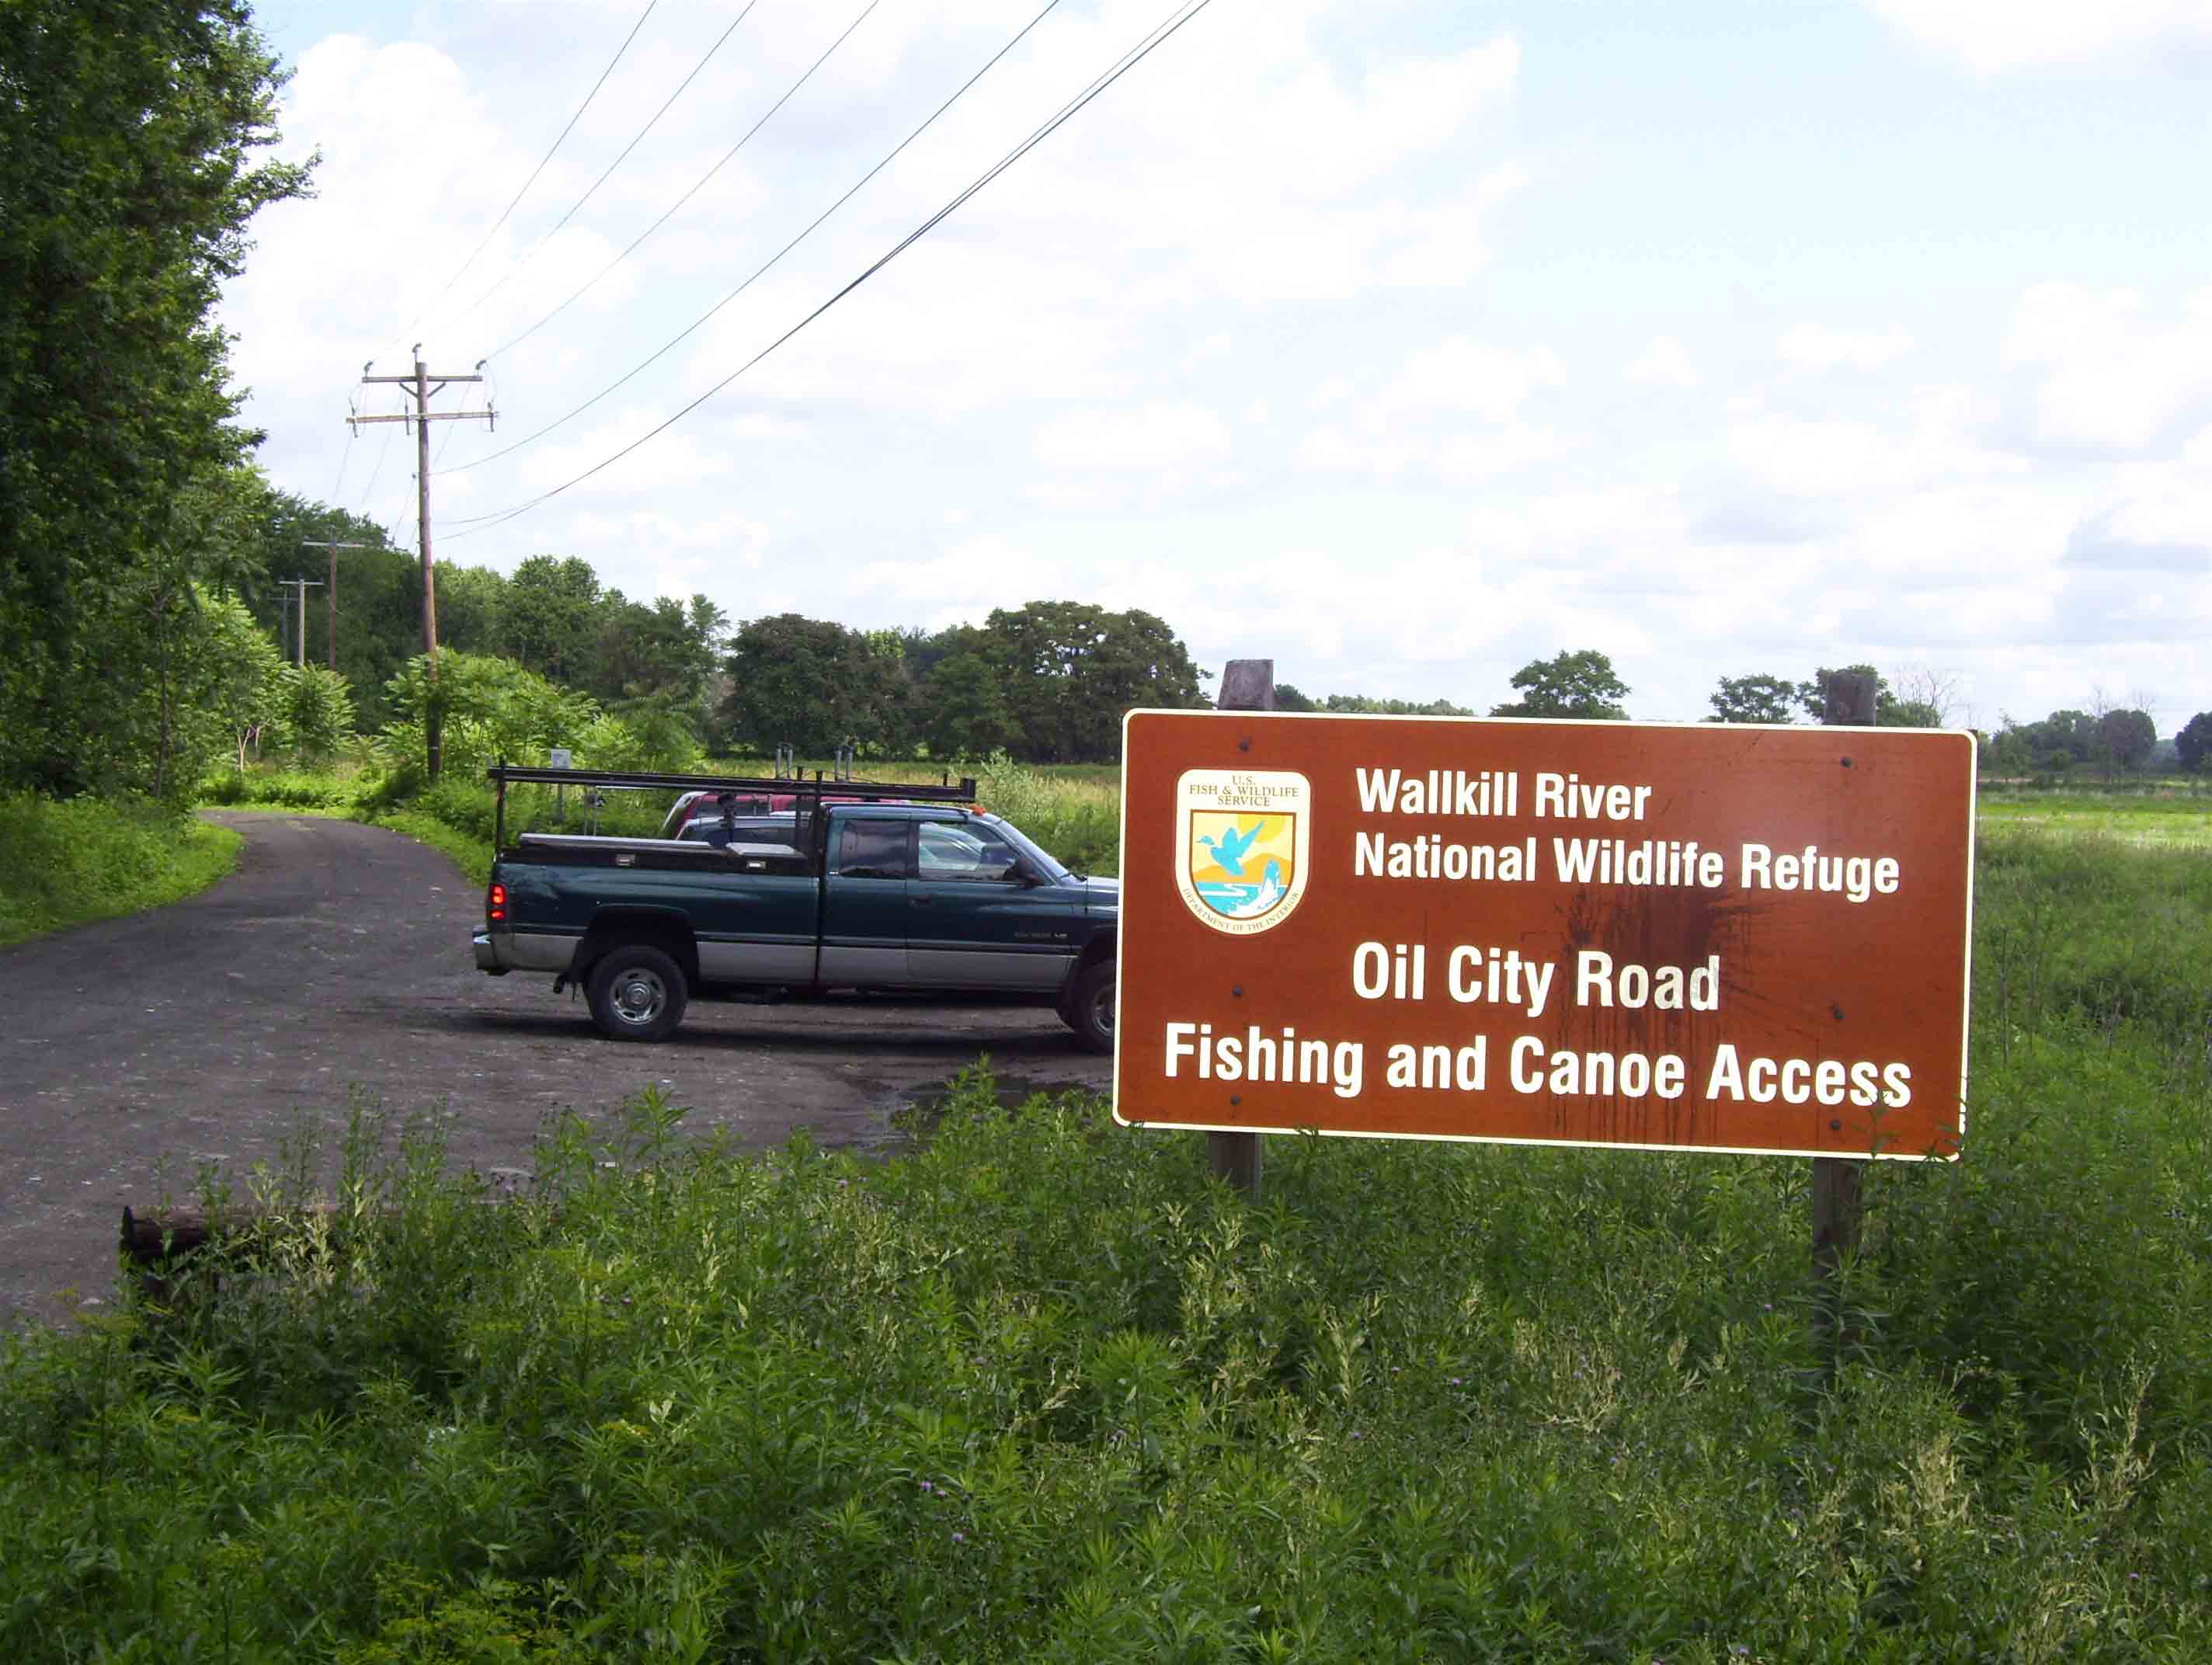 mm 9.0  Parking area for fishing and canoeing on the Walkill River. Use by hikers is presumably also allowed.  Courtesy dlcul@conncoll.edu